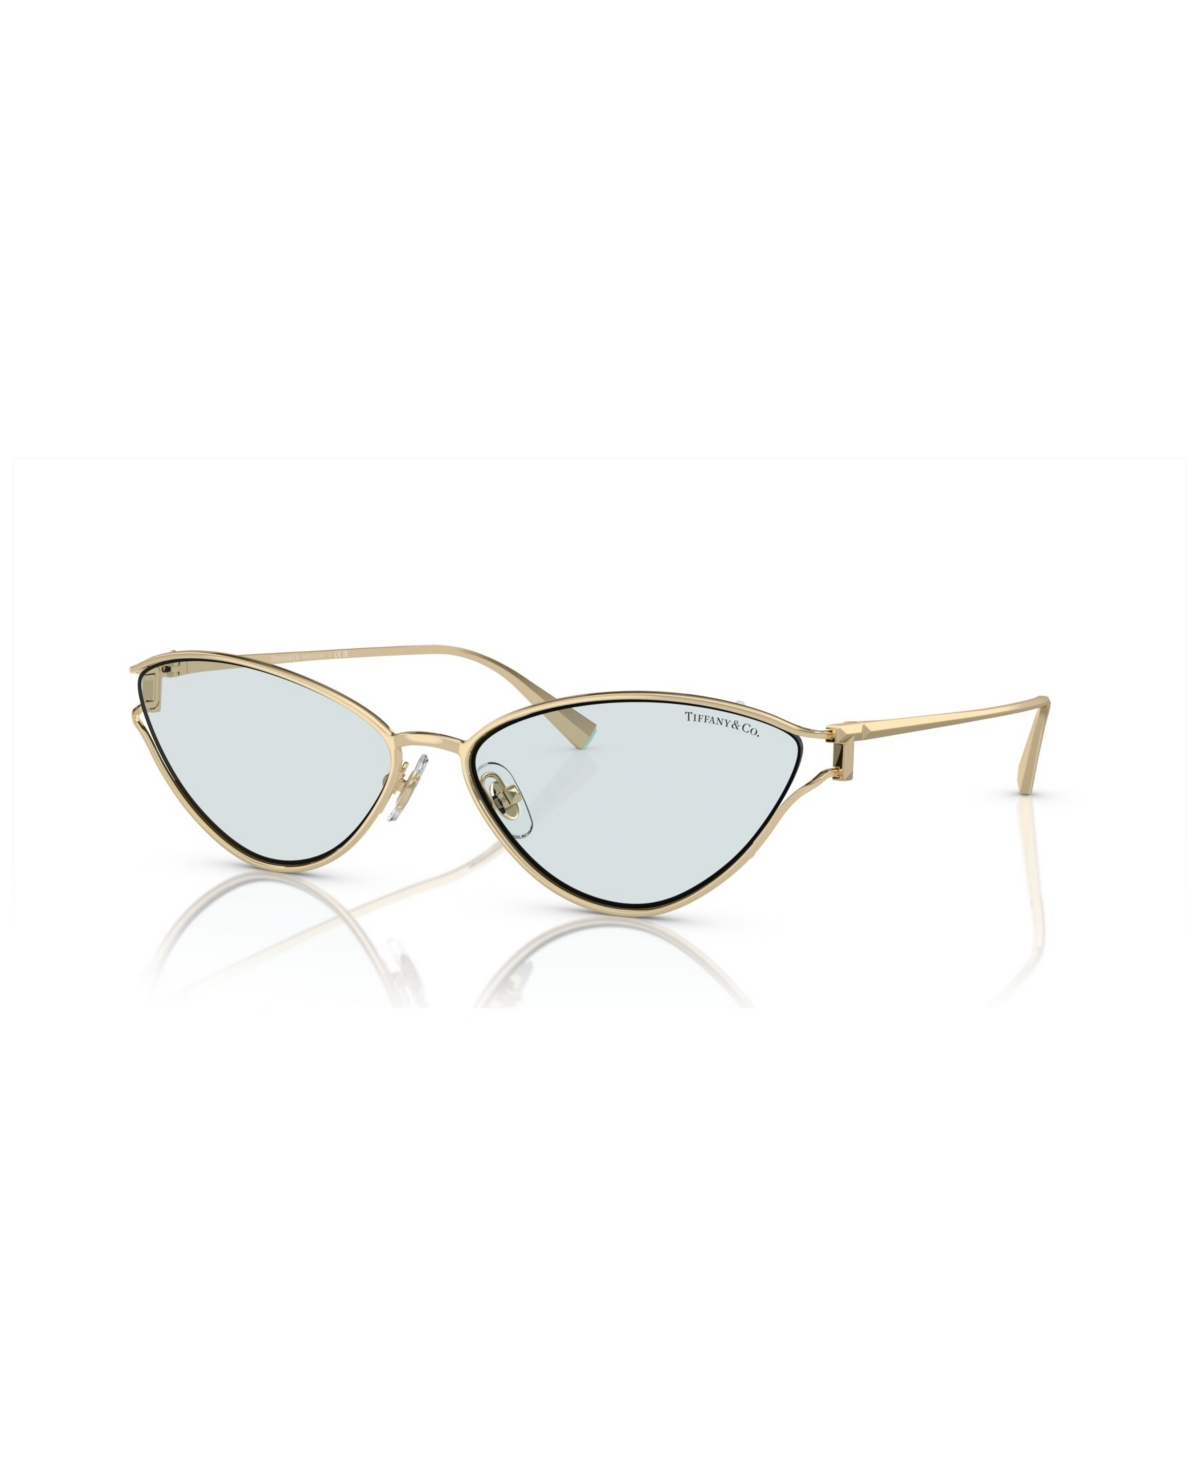 Tiffany & Co Women's Sunglasses, Photocromic Tf3095 In Pale Gold